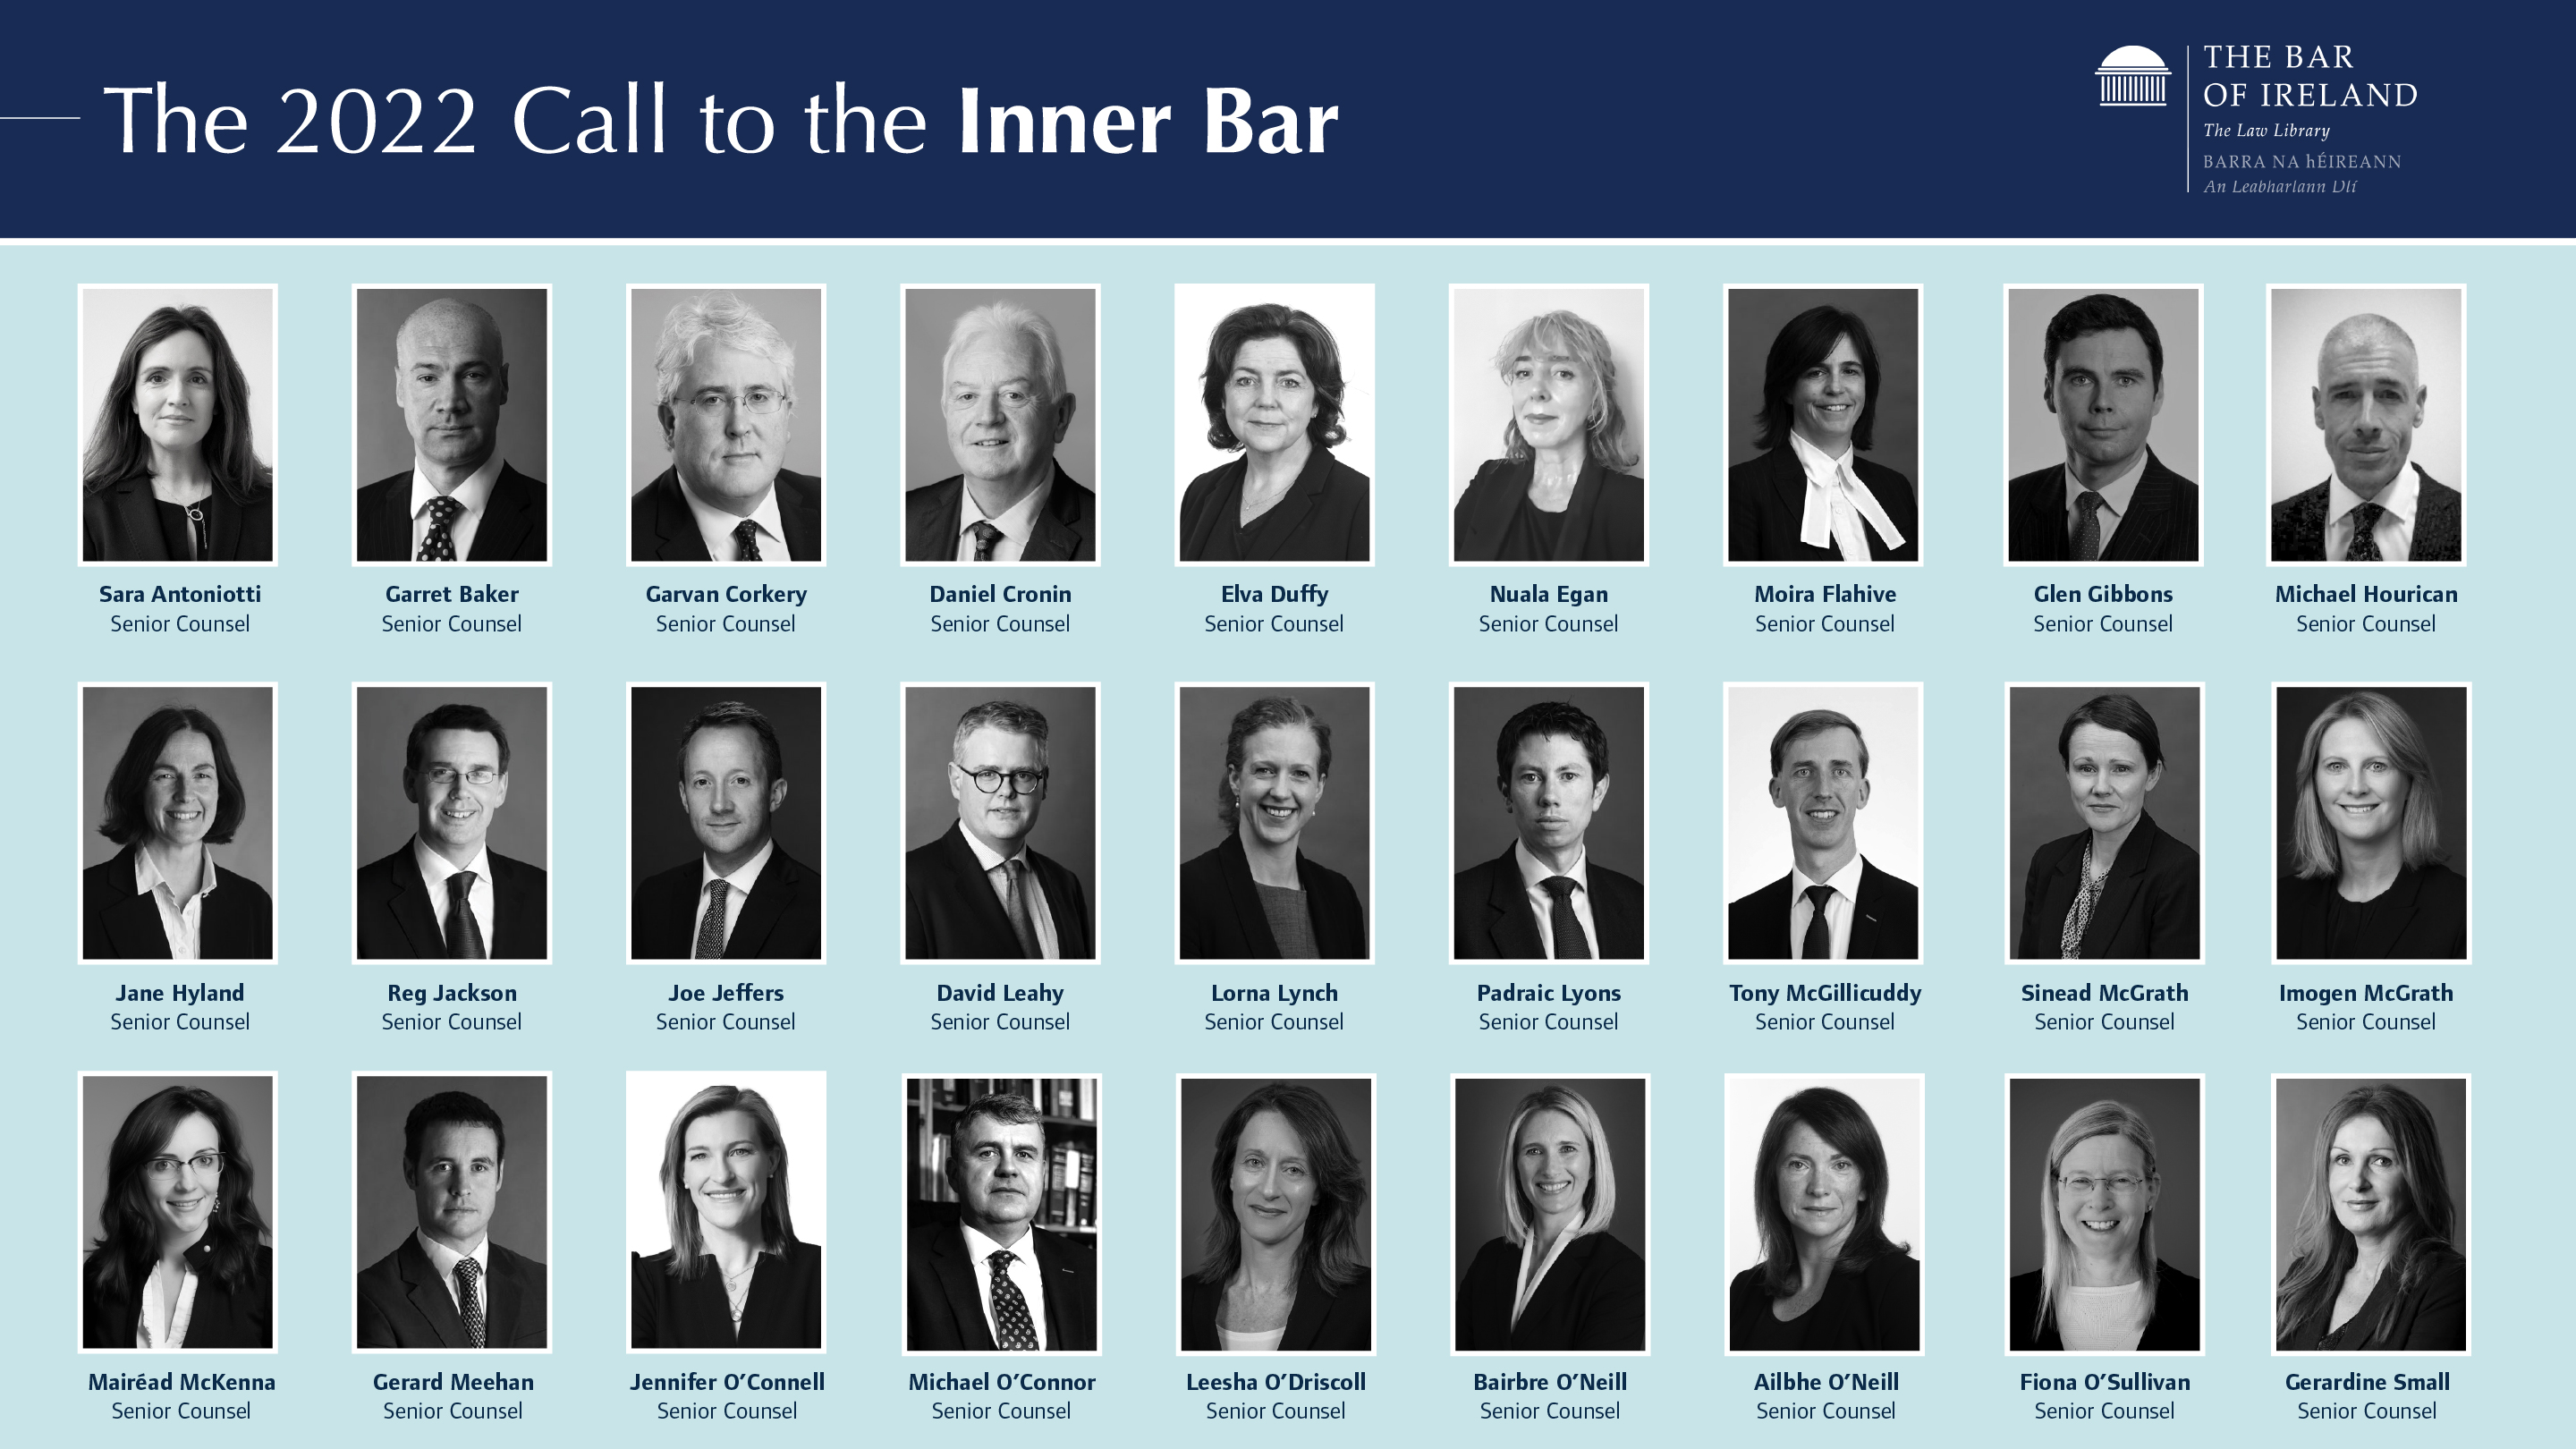 Women now make up fifth of senior barristers